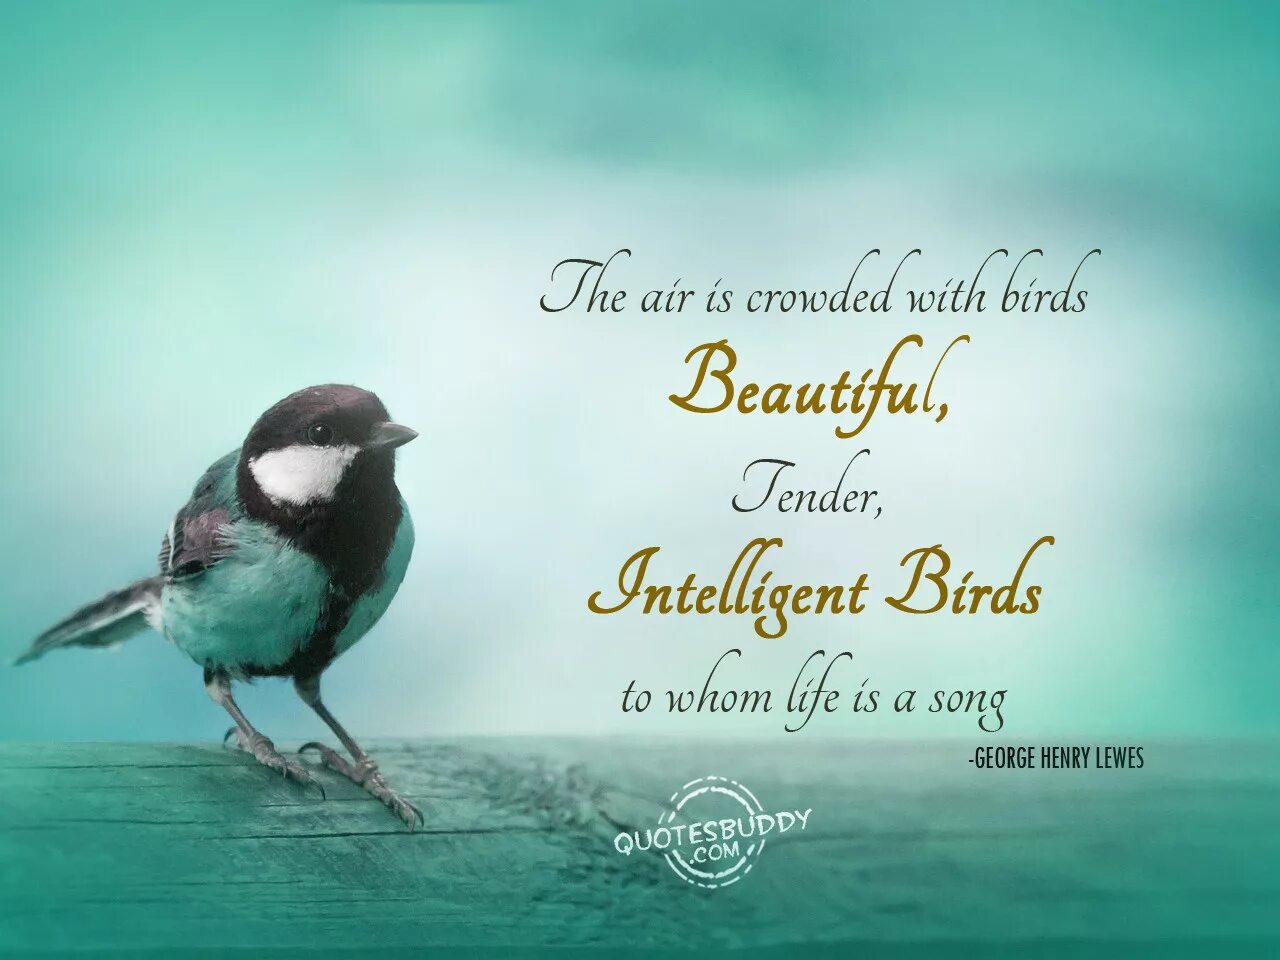 I love birds. Quotes with Birds. Quotes about Birds. Beautiful Birds бренд. Quotes about early Birds.